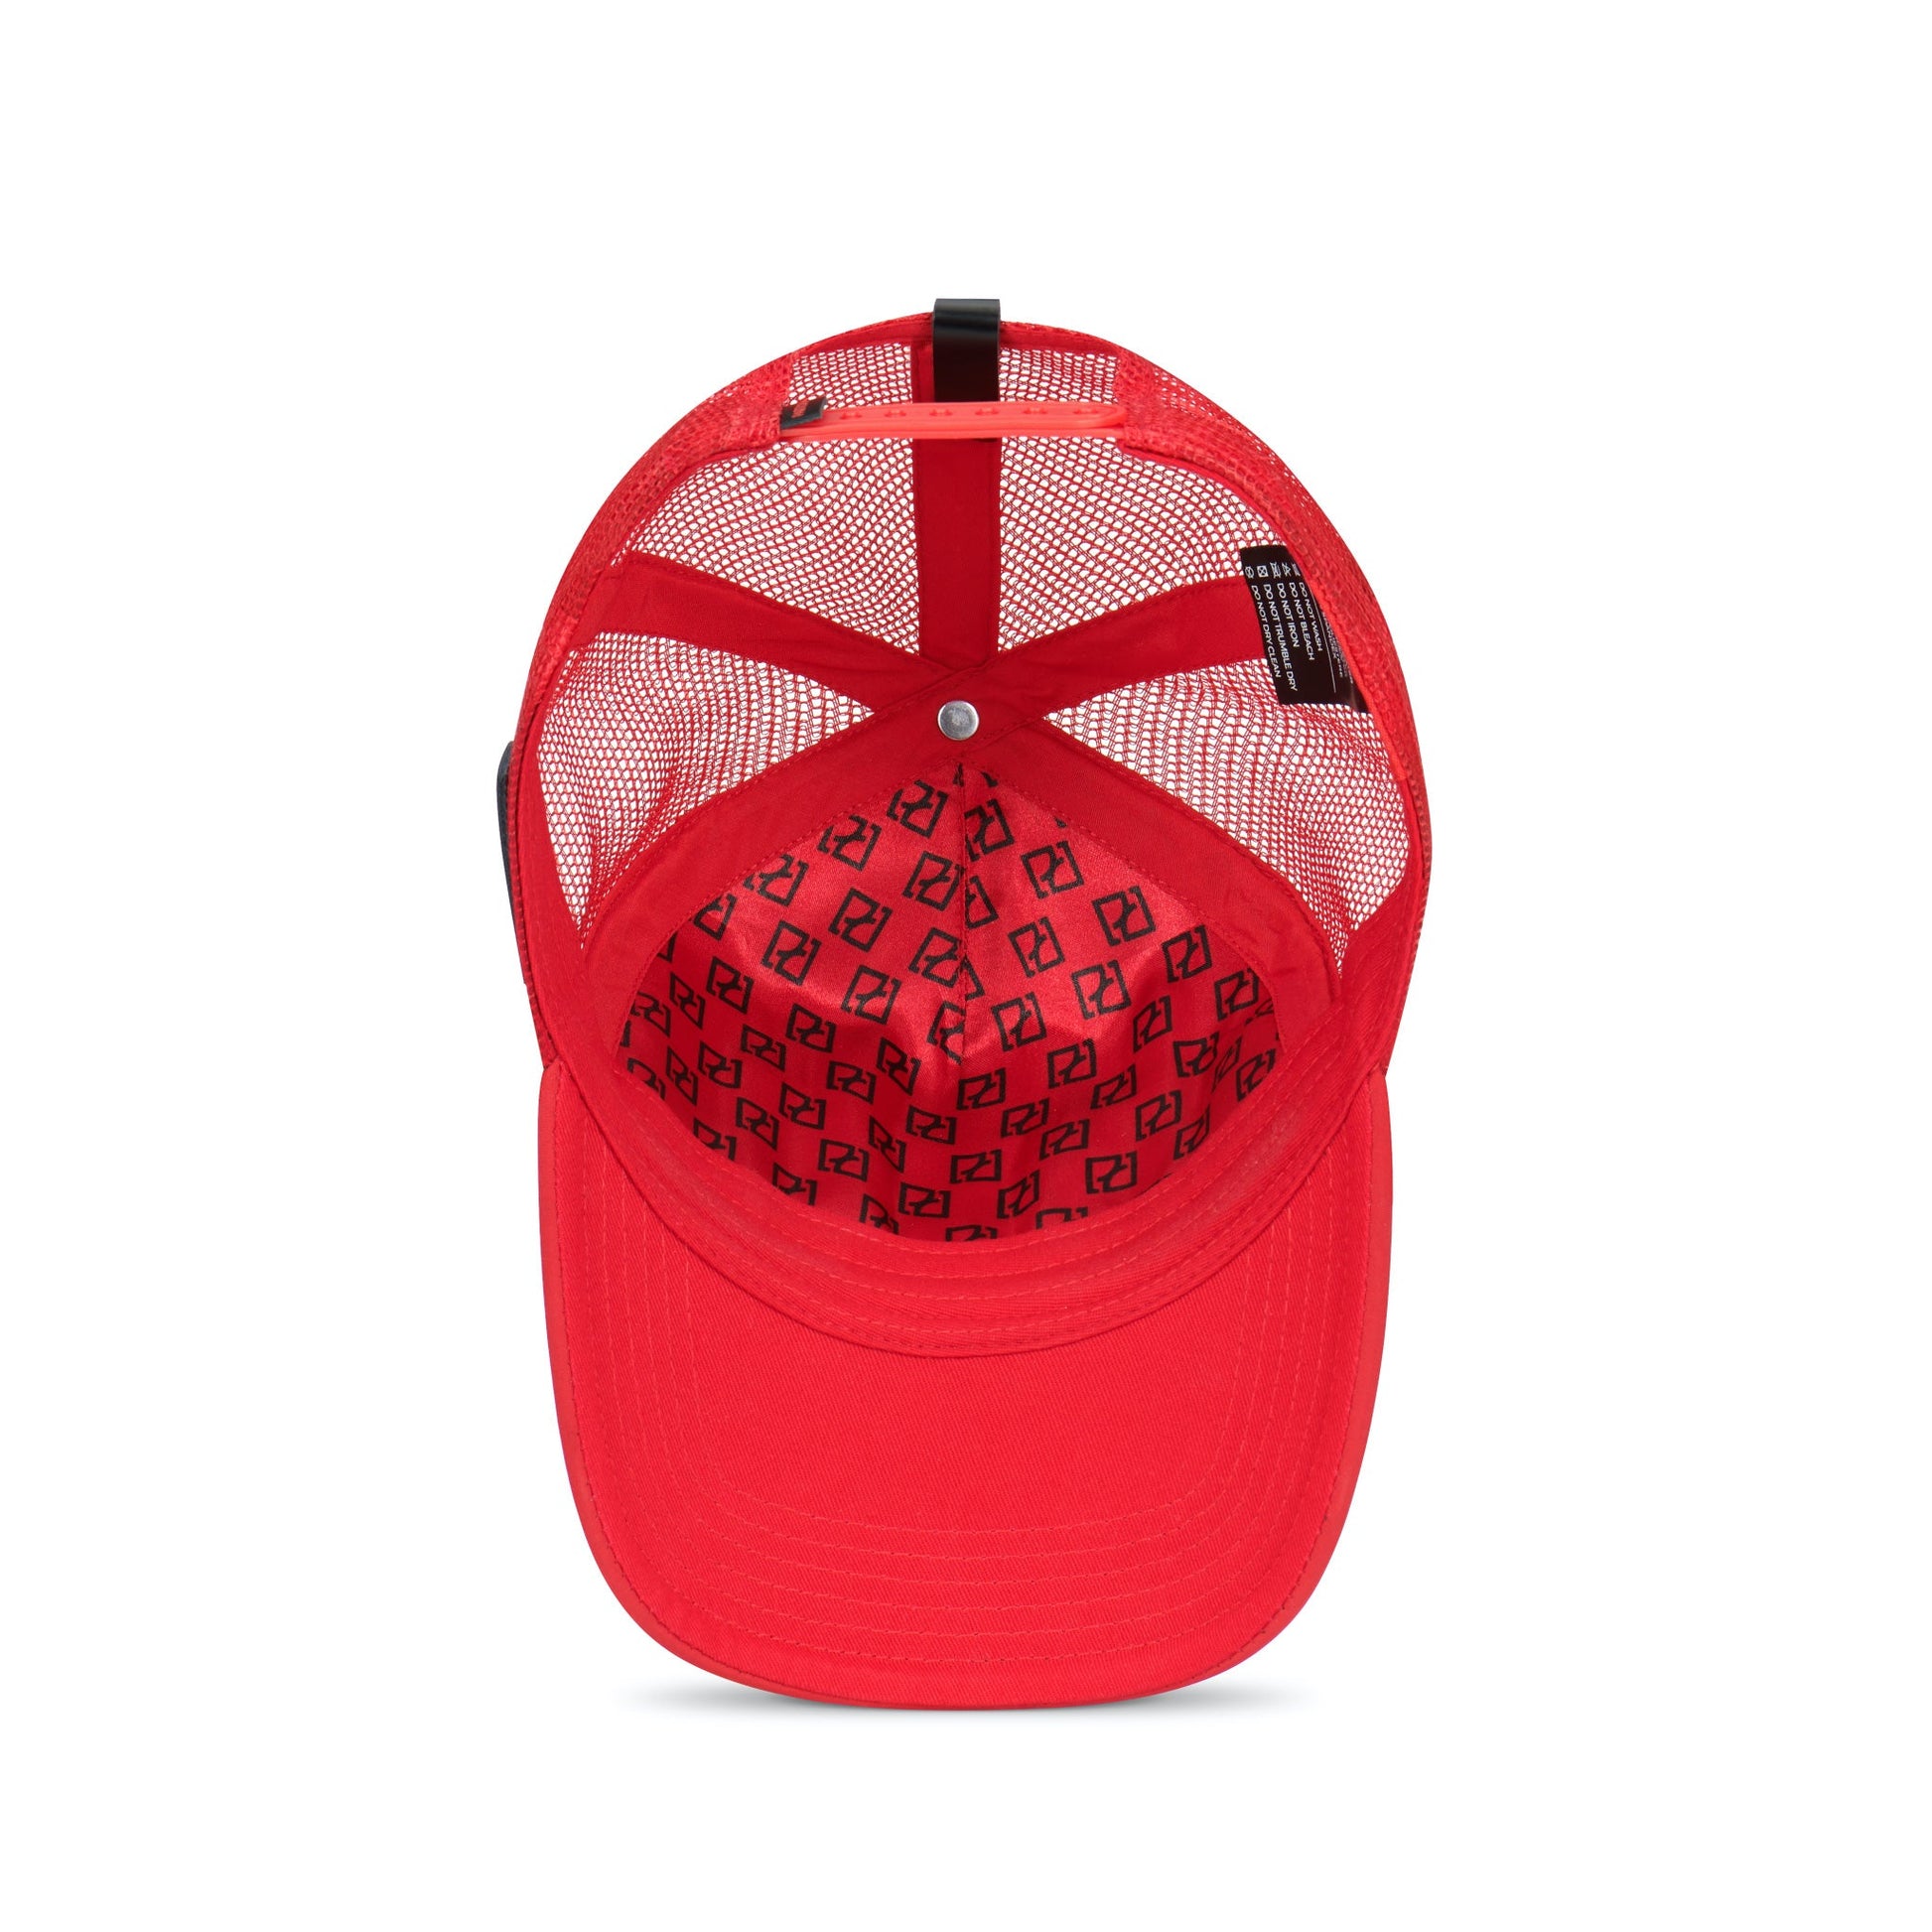 Partch hats and caps | Red | Leather - snapback closure